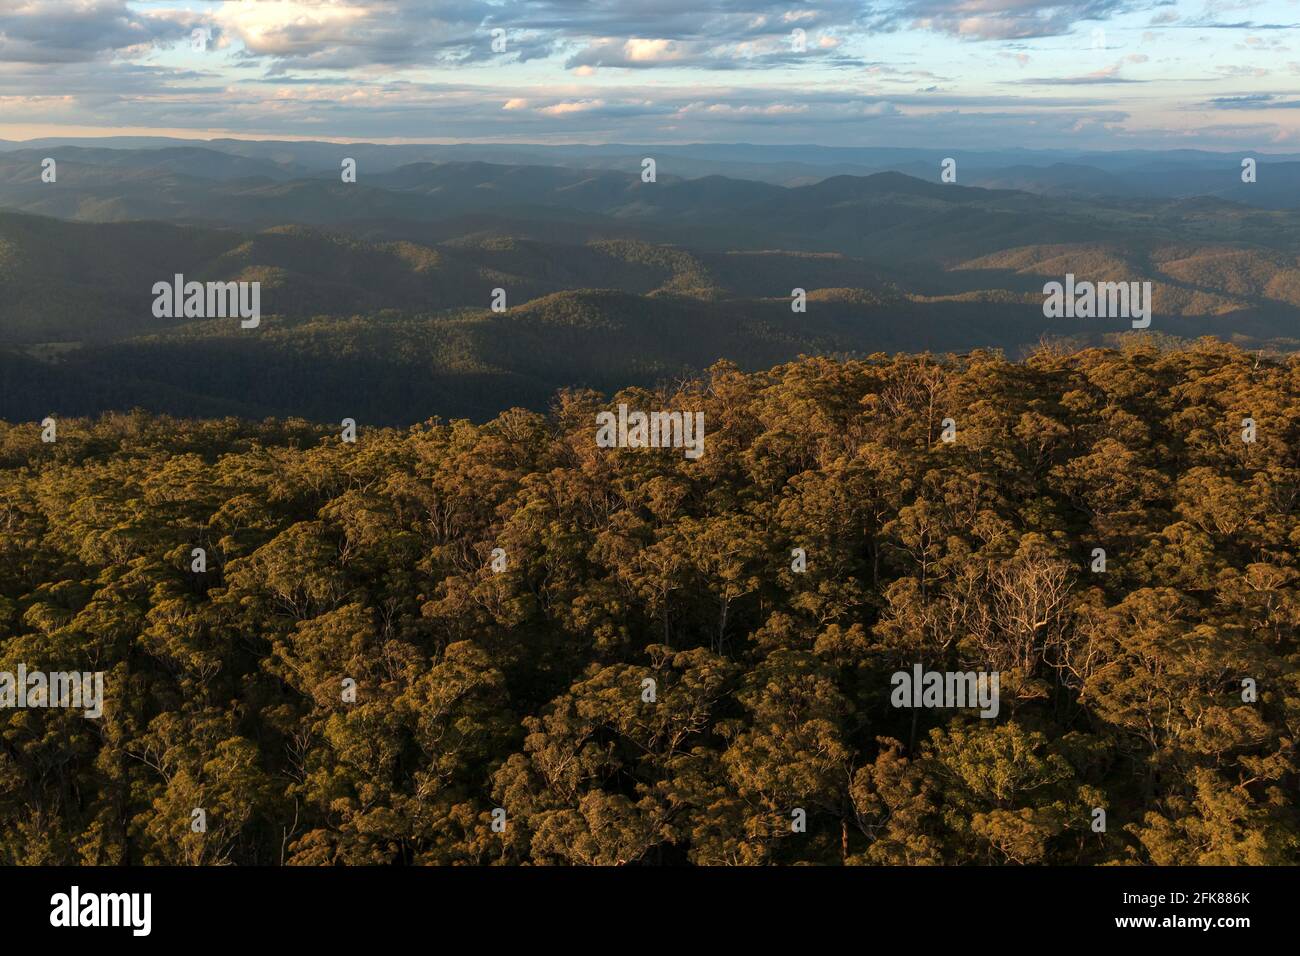 Sunset over an old growth Eucalyptus forest high in the Great Dividing Range near Nowendoc, NSW, Australia. Stock Photo